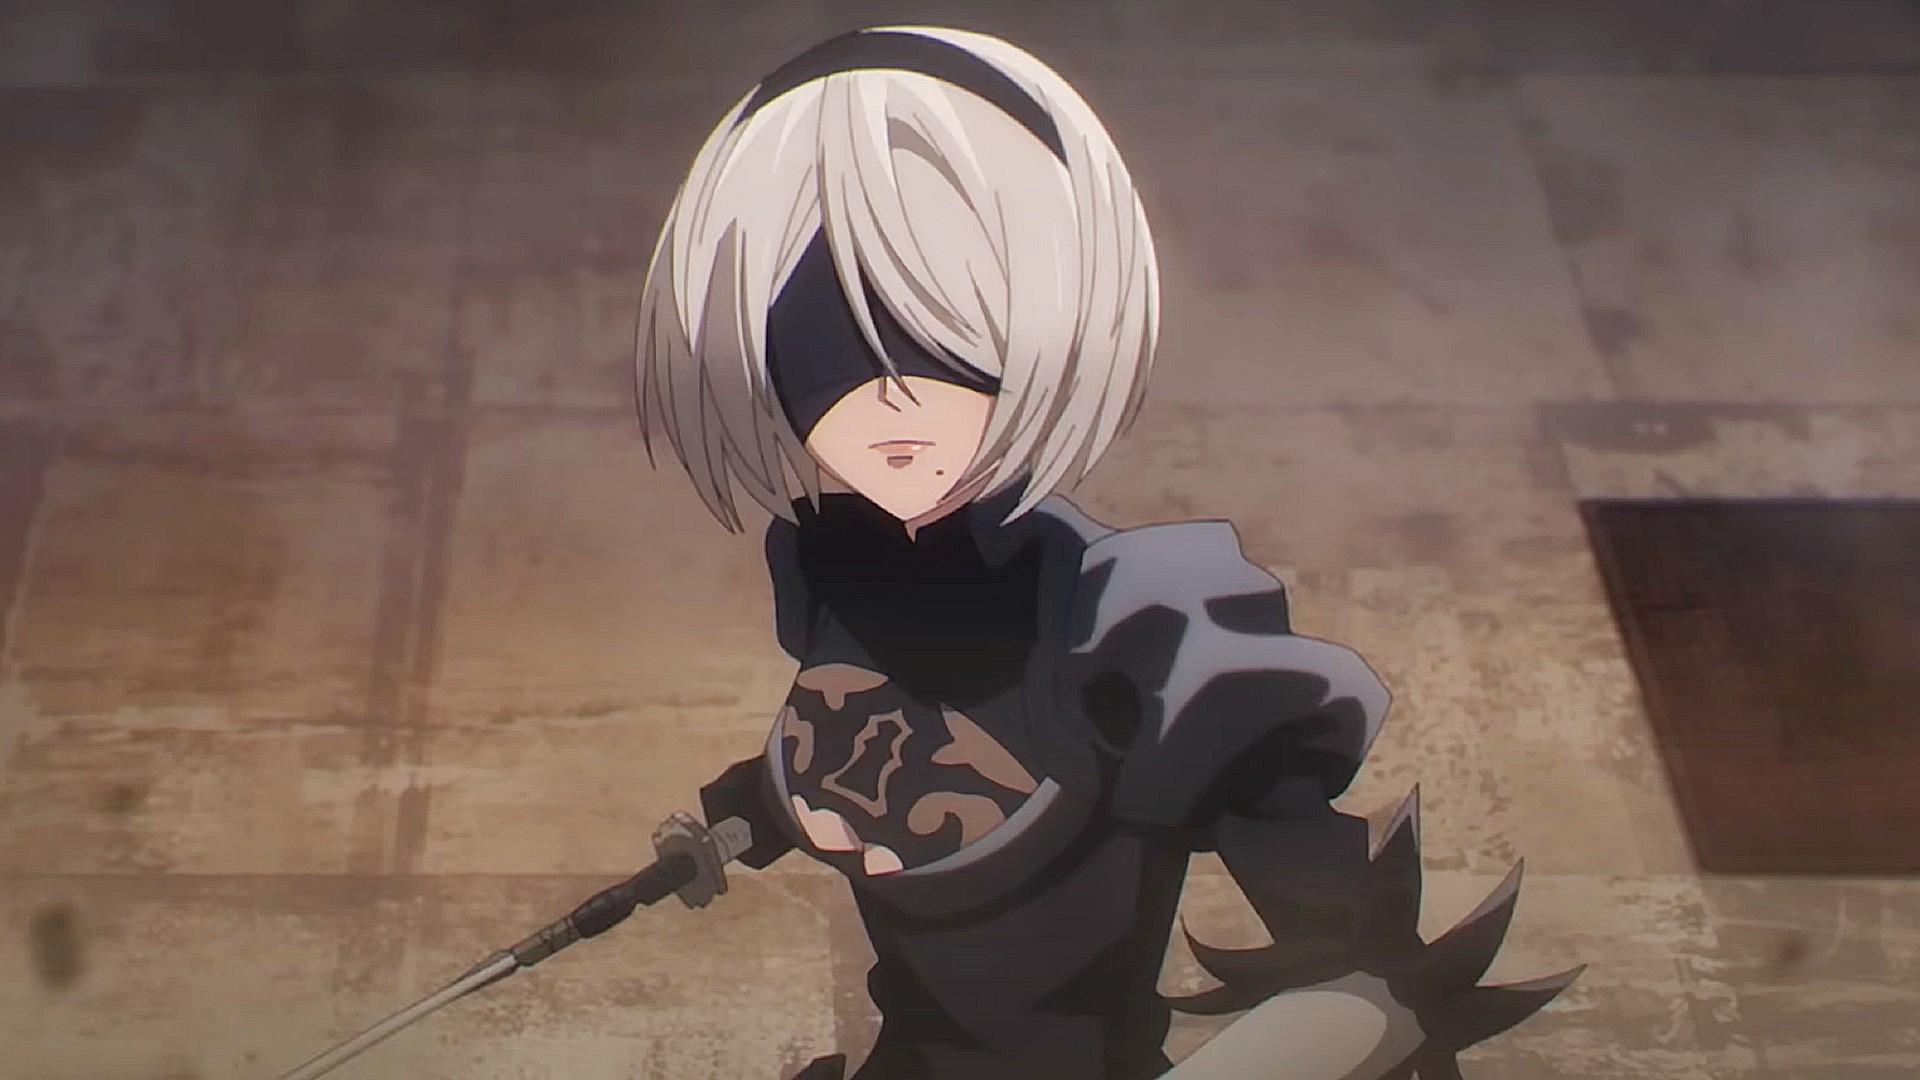 Nier Automata anime release date is very, very soon